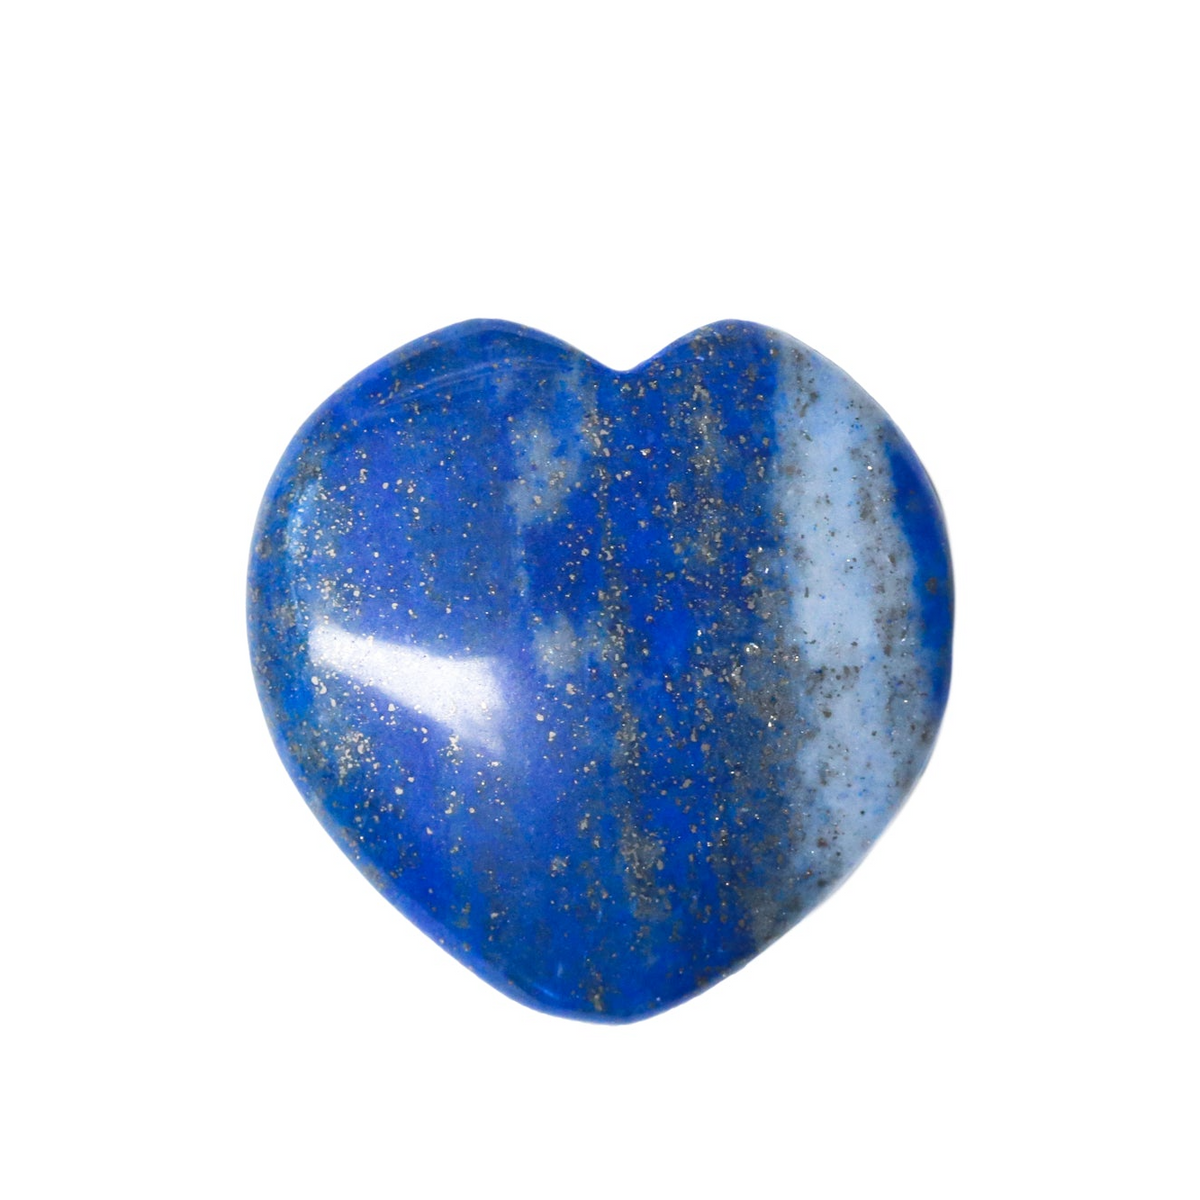 a blue heart shaped object on a white background